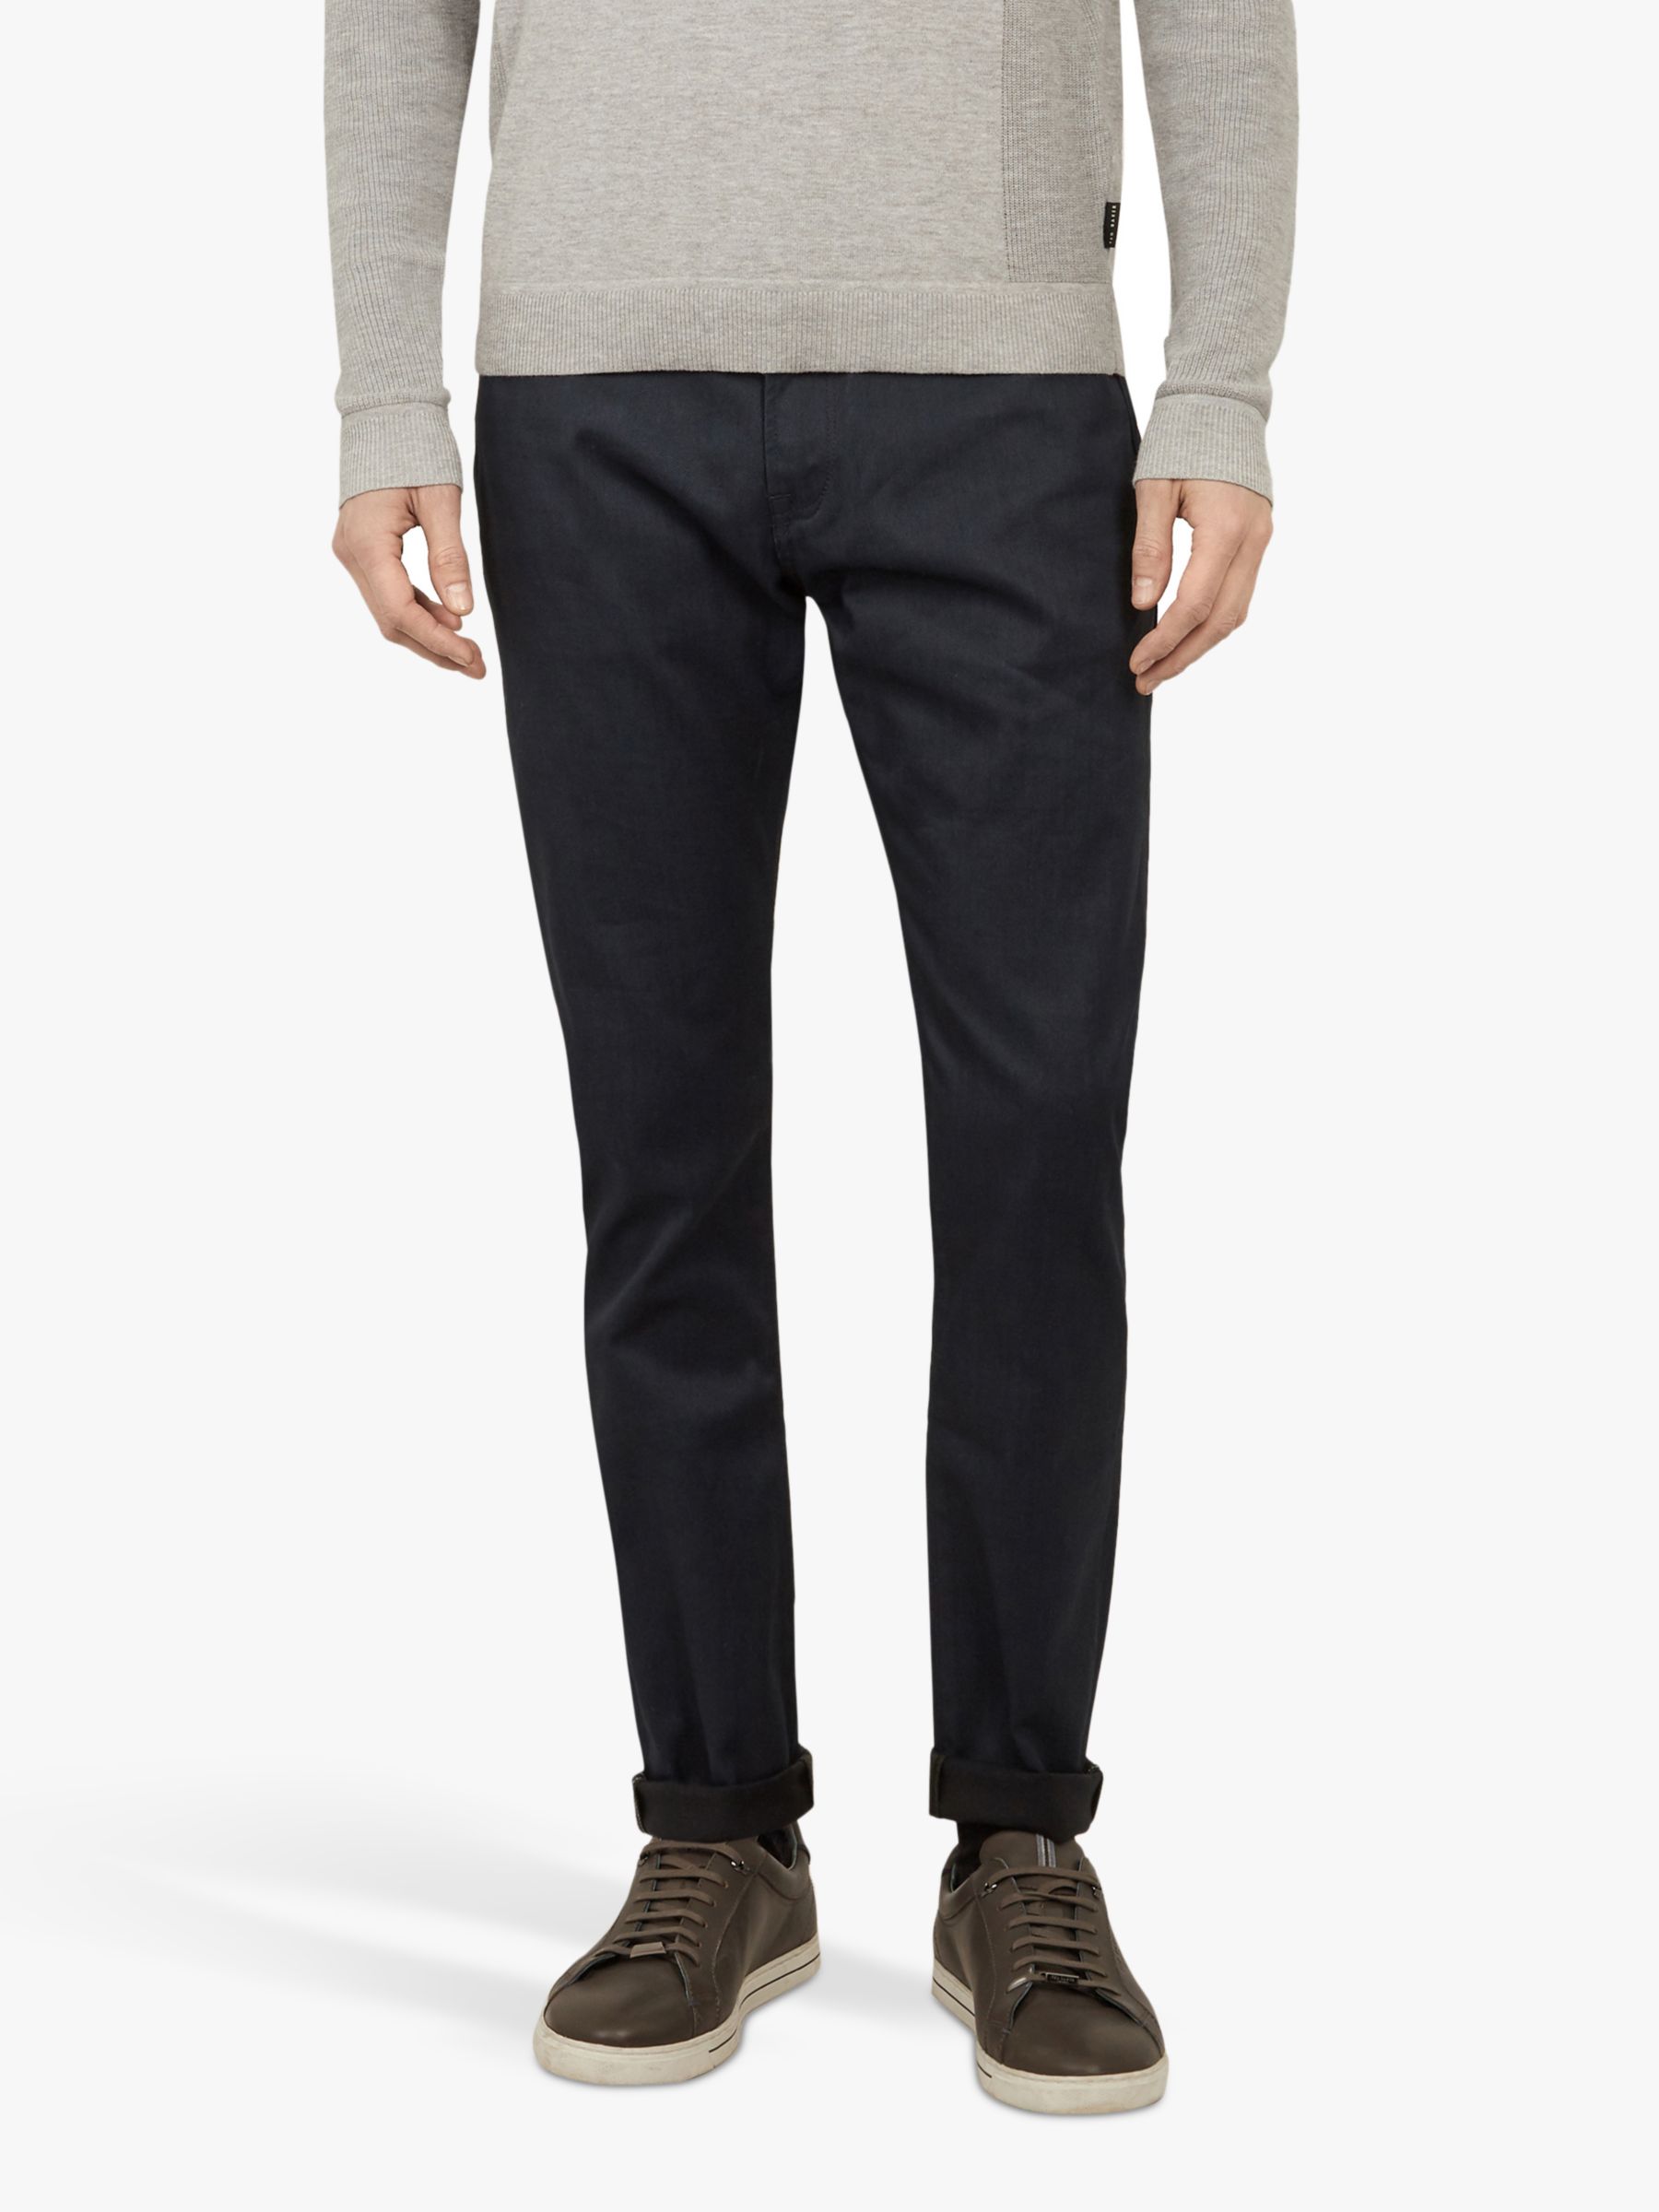 Ted Baker Alforon Tailored Straight Leg Jeans, Teal Blue